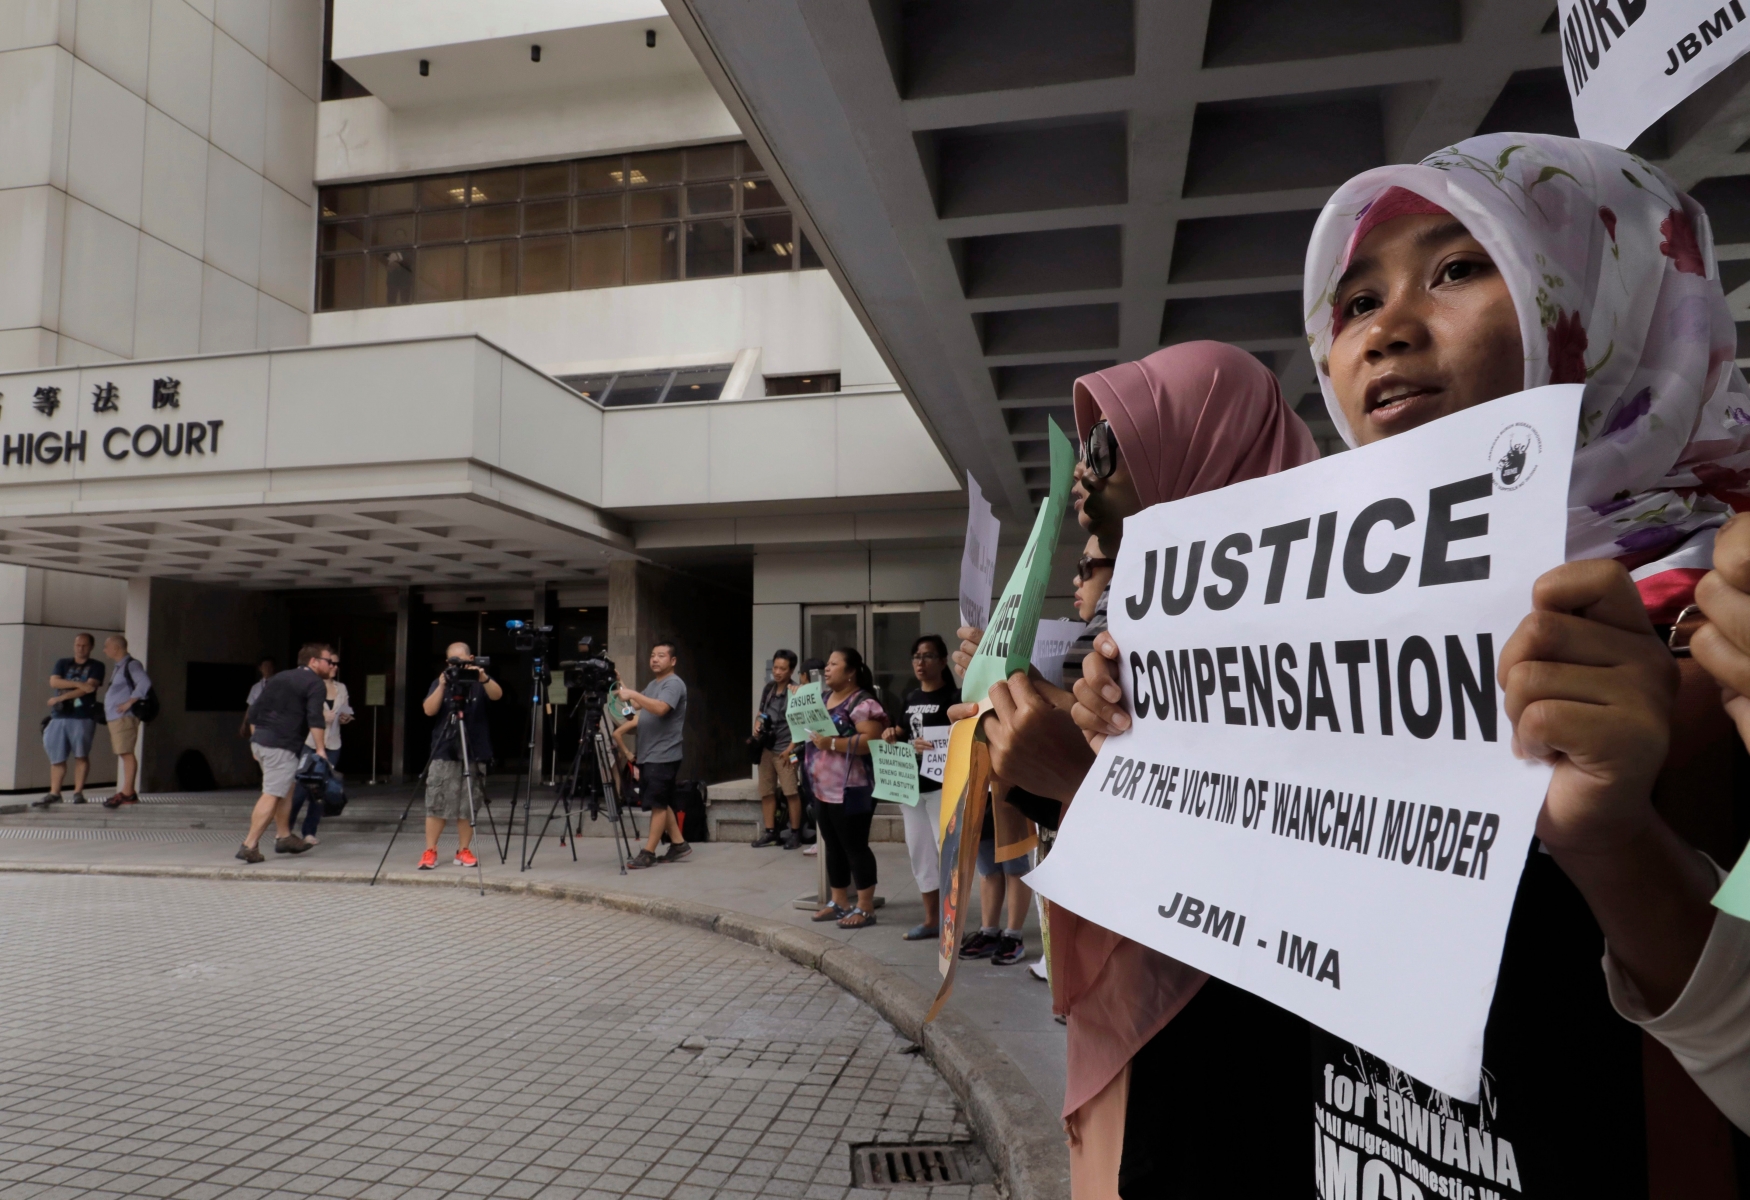 A migrant workers alliance group holds placards to protest the killings of two Indonesian women in 2014 outside the High Court in Hong Kong, Monday, Oct. 24, 2016. British banker Rurik Jutting accused of the grisly 2014 killings pleaded not guilty when he went on trial Monday, in a case expected to highlight the Asian financial hub's inequality and privileged lifestyle of its wealthy expat elite. (AP Photo/Vincent Yu) Hong Kong British Banker Murder Trial